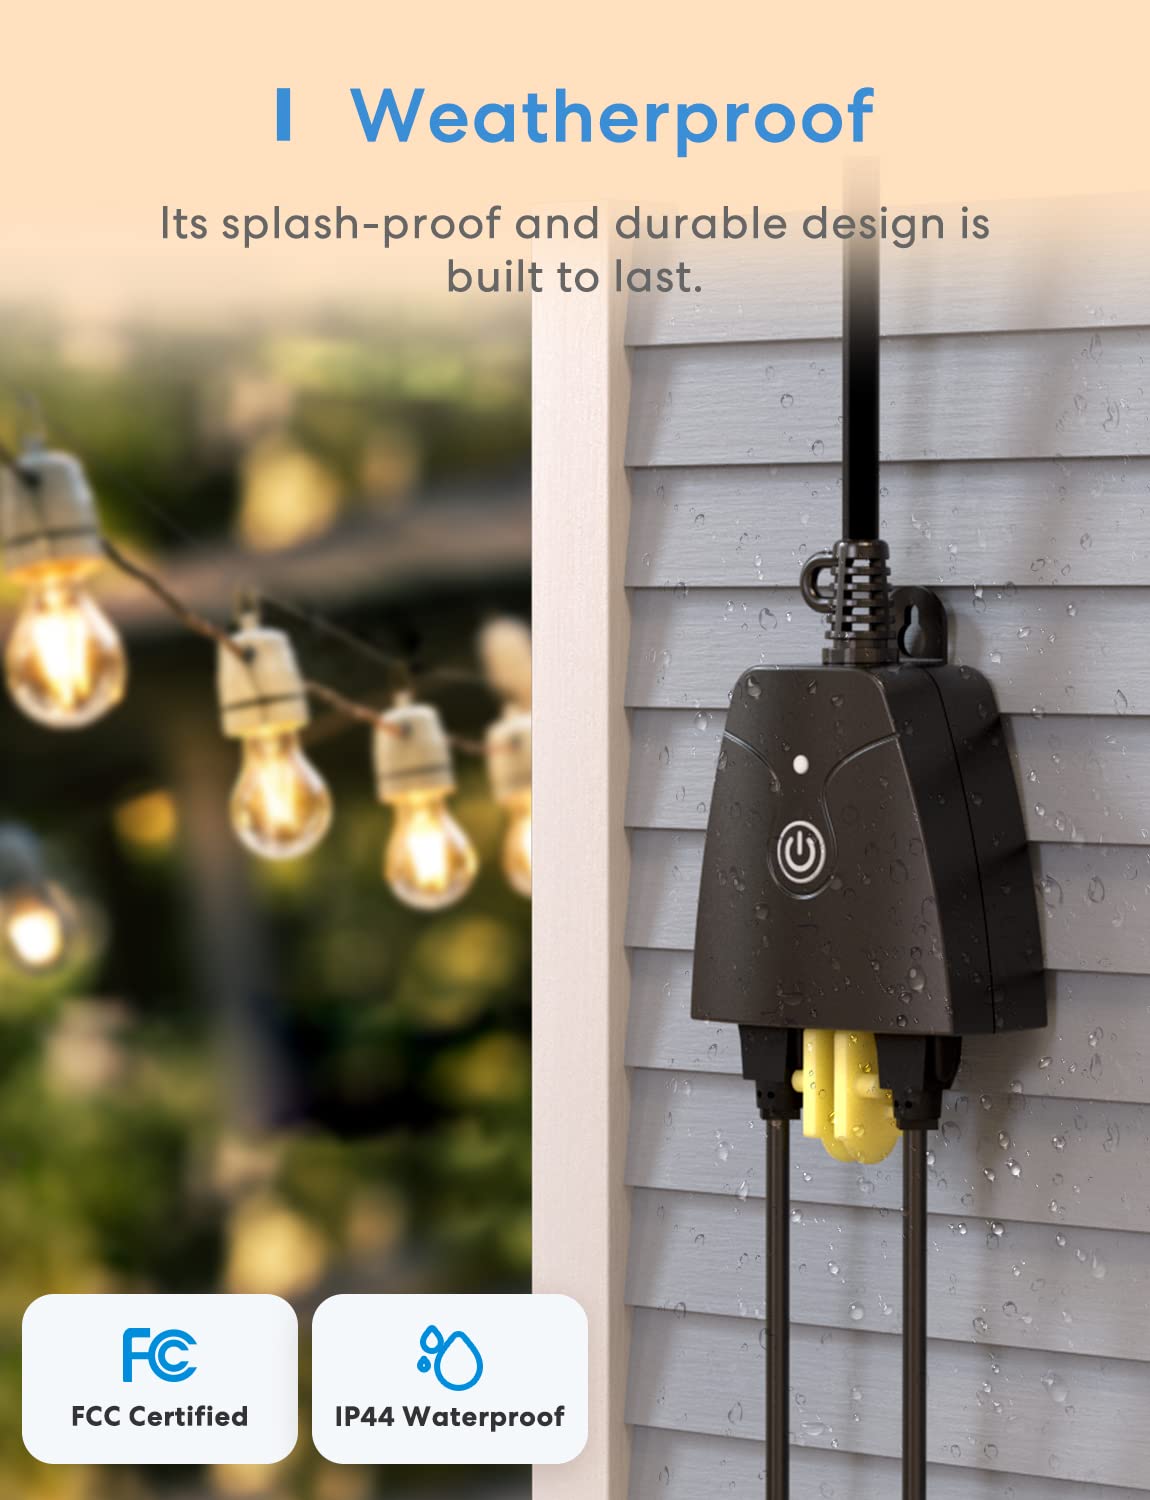 Meross HomeKit Outdoor Smart Plug Wi-Fi Outlet with 2 Grounded